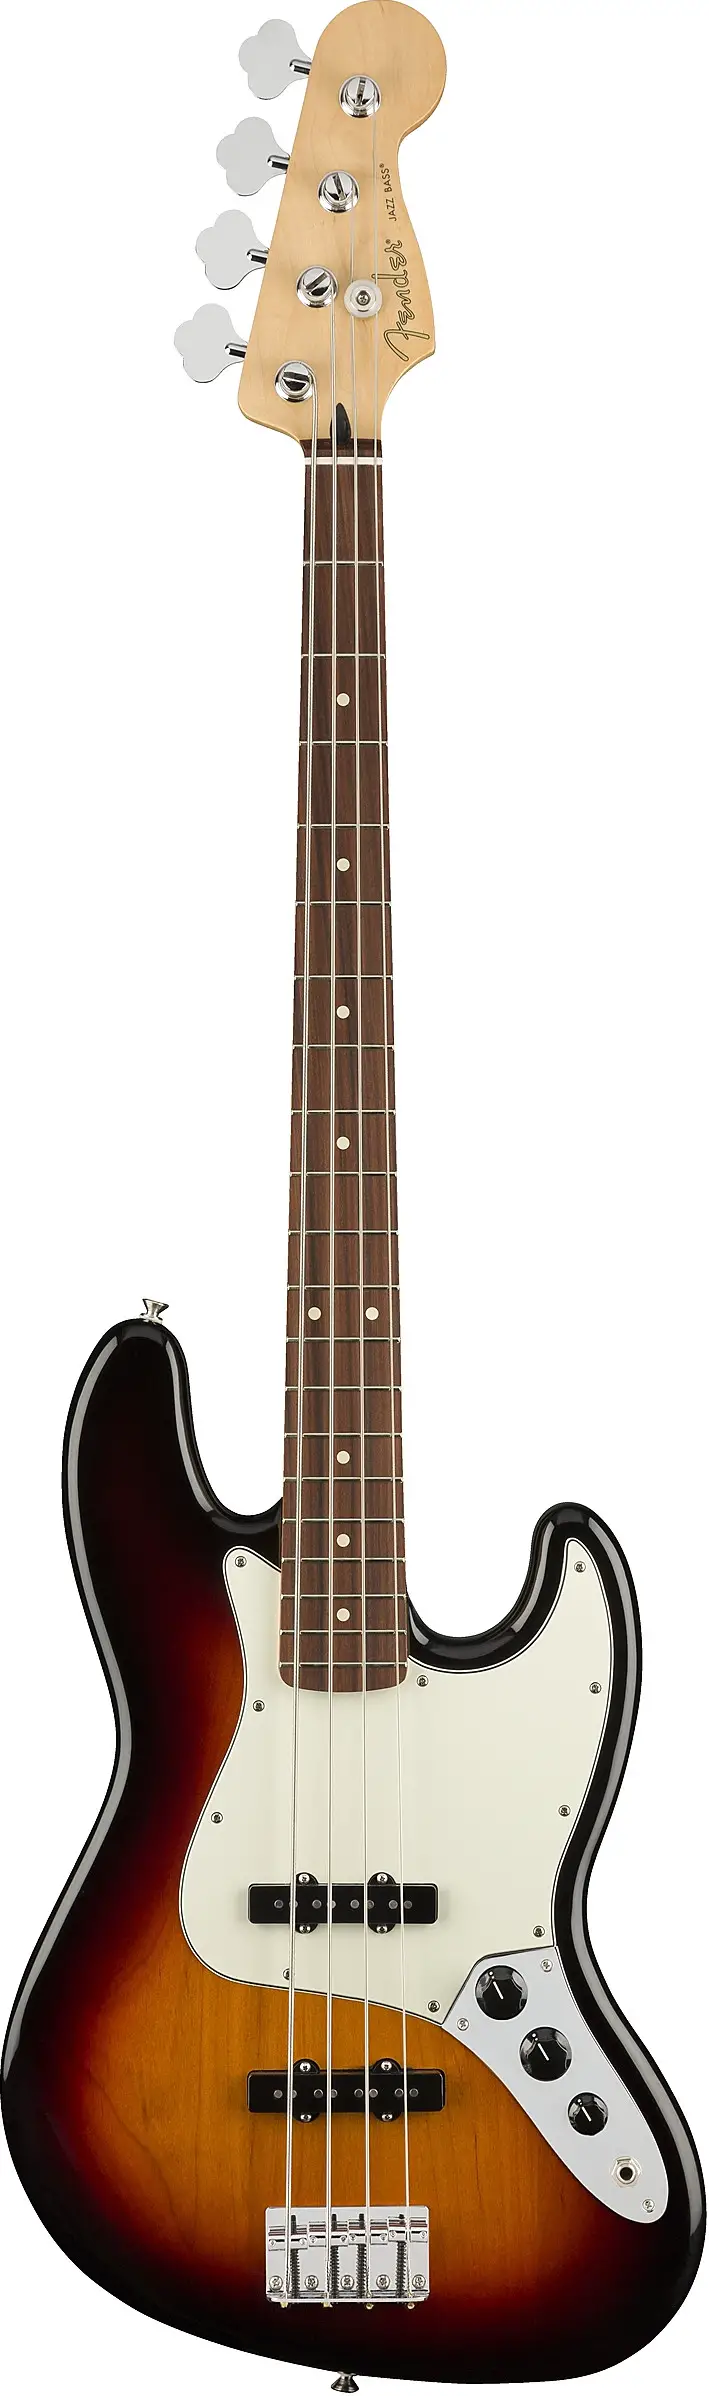 Player Jazz Bass by Fender